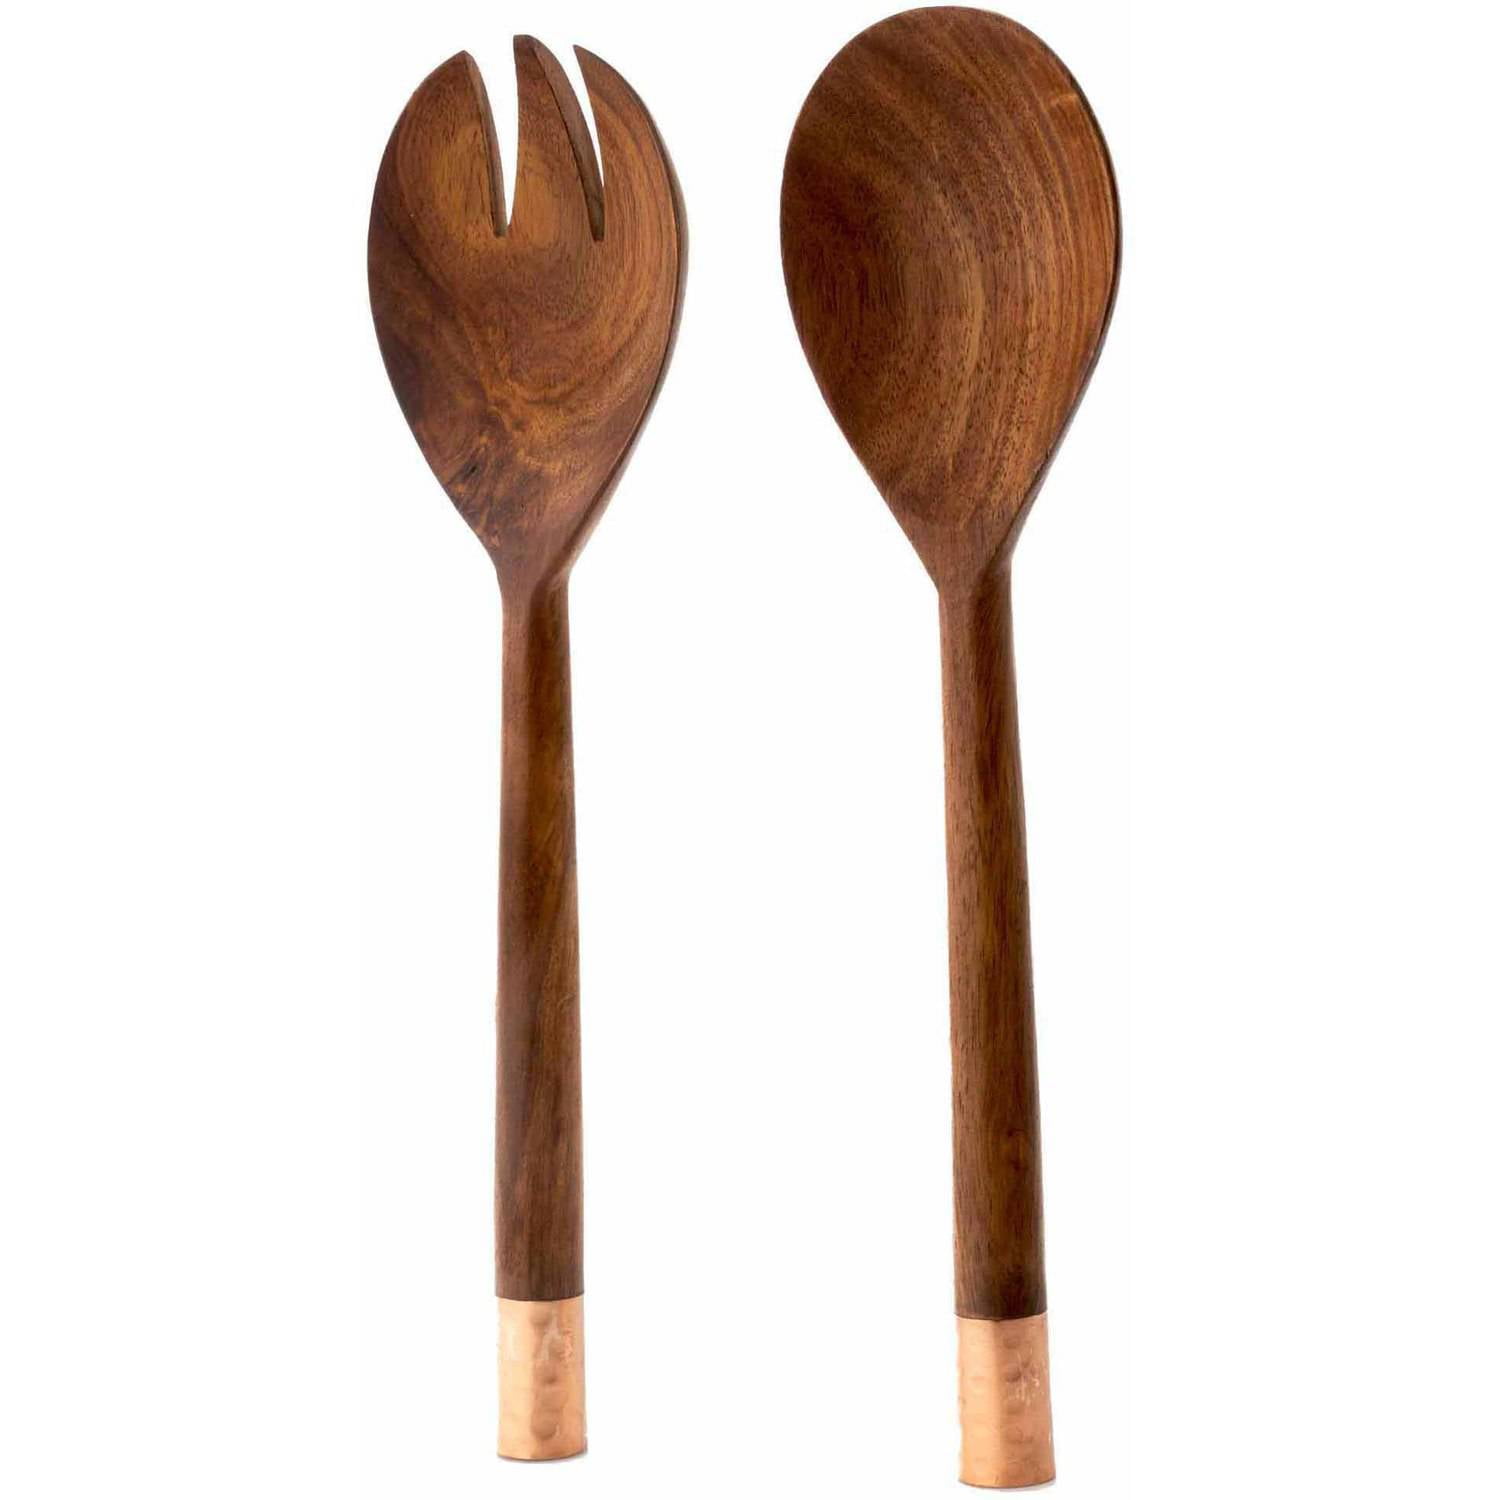 NEW Wooden Salad Serving Spoon And Fork Set Appx 12" long 